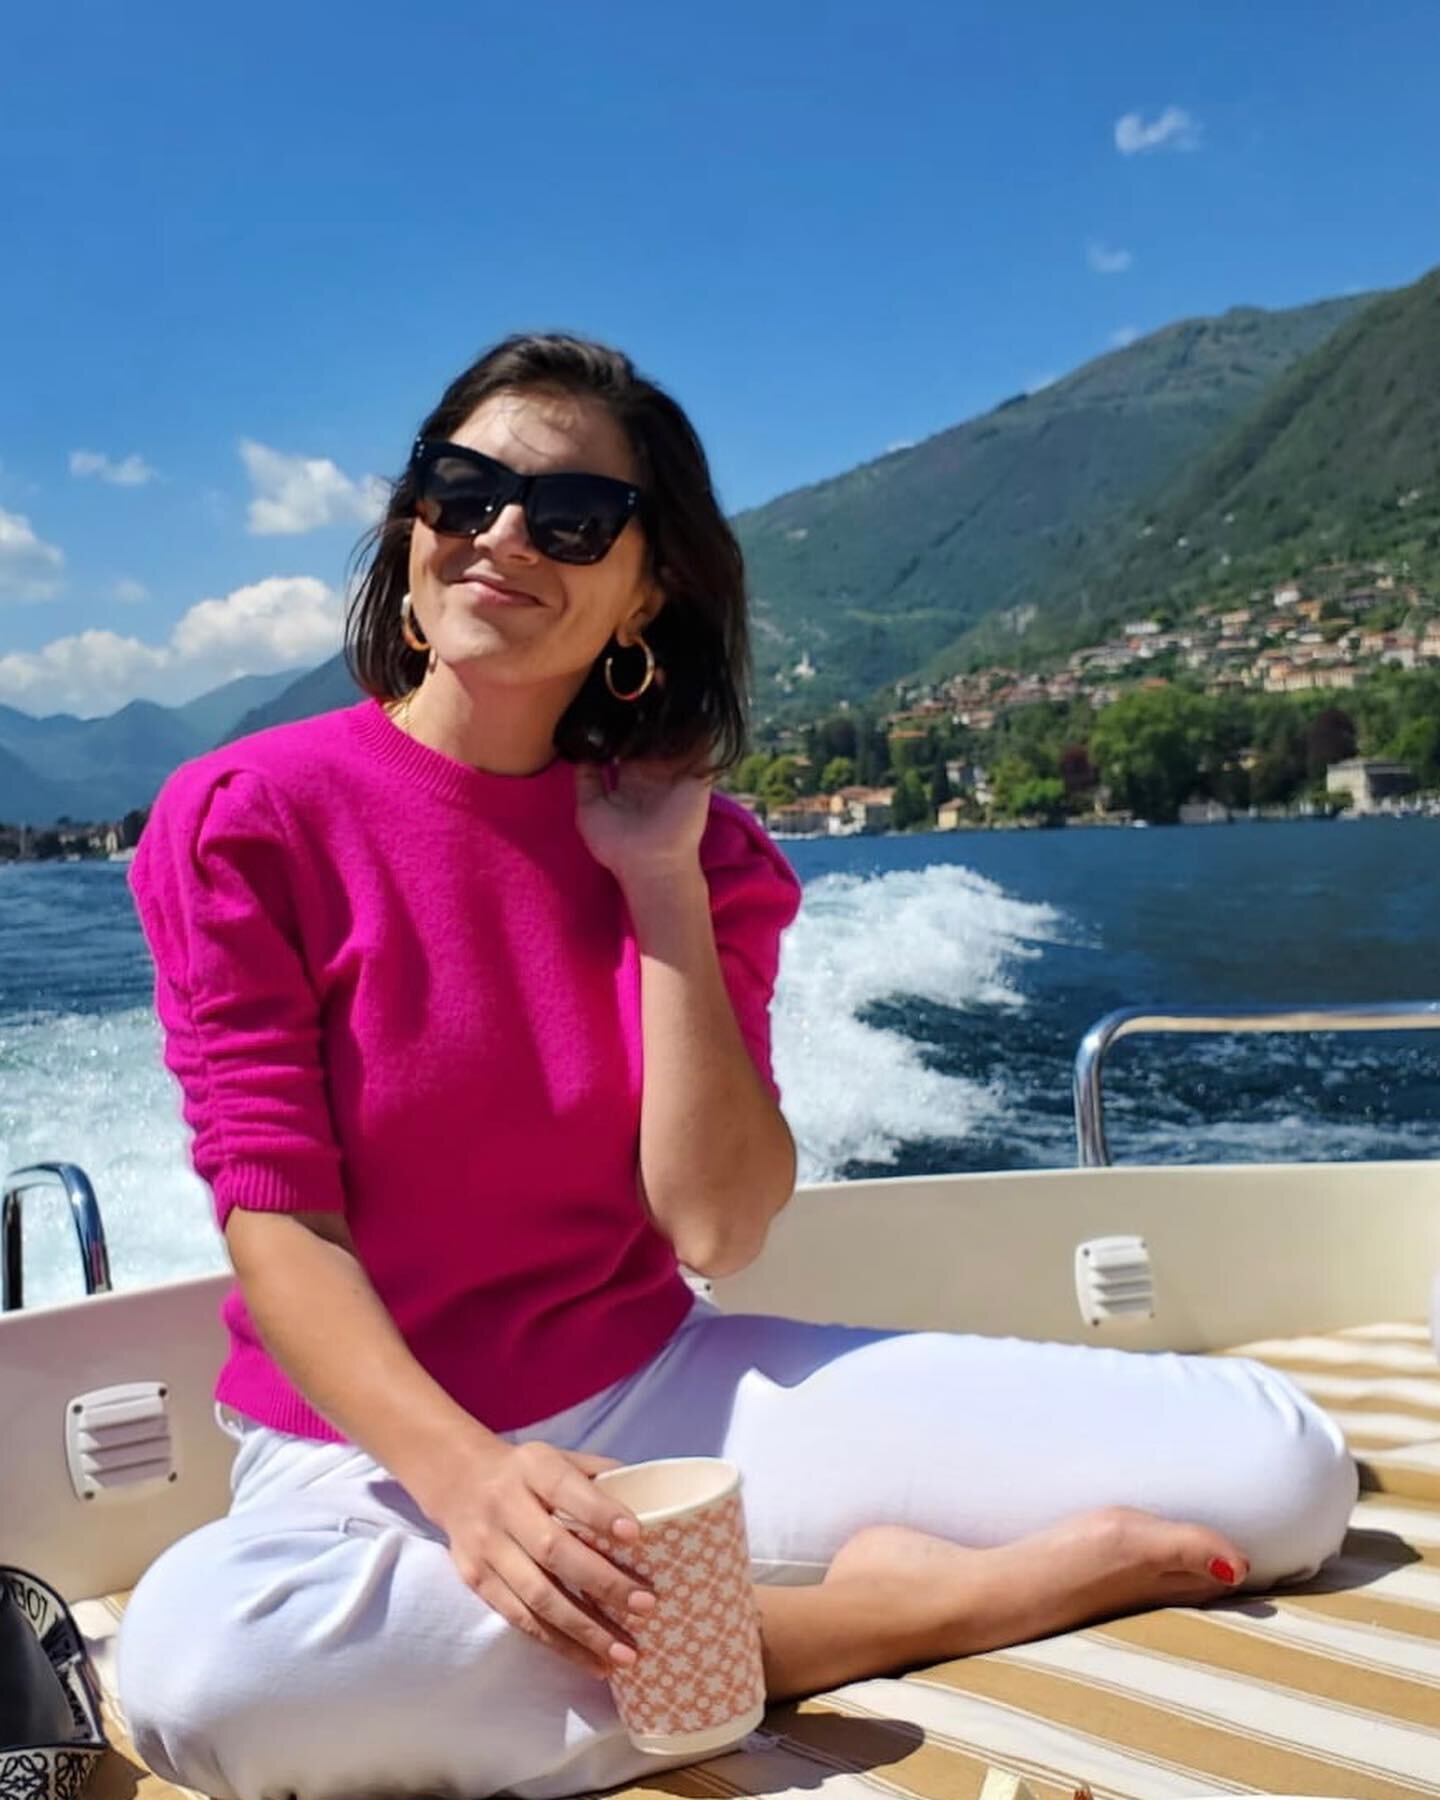 Boat days are the best days !🚤 🍾 

On Lake Como it&rsquo;s all about gorgeous scenery, cocktails, snacks, music and fun company ! We saw incredible villas, gardens, waterfalls and all the quaint villages along the lake. 

From @passalacqualakecomo 